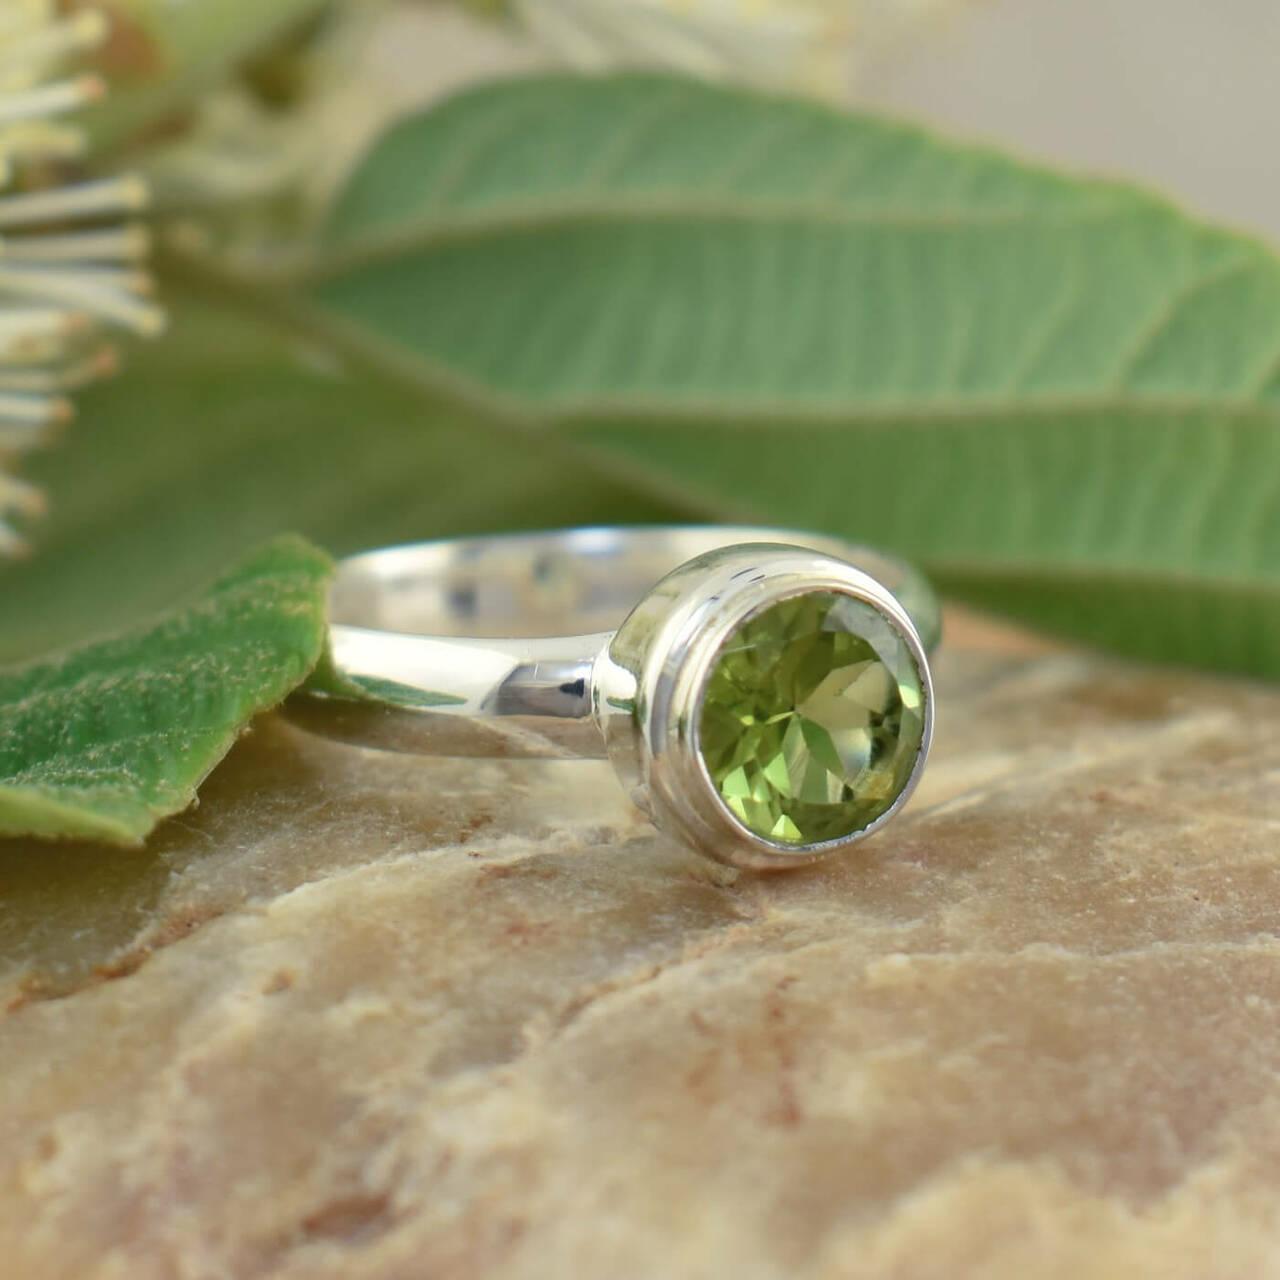 Green stone ring with sterling silver band